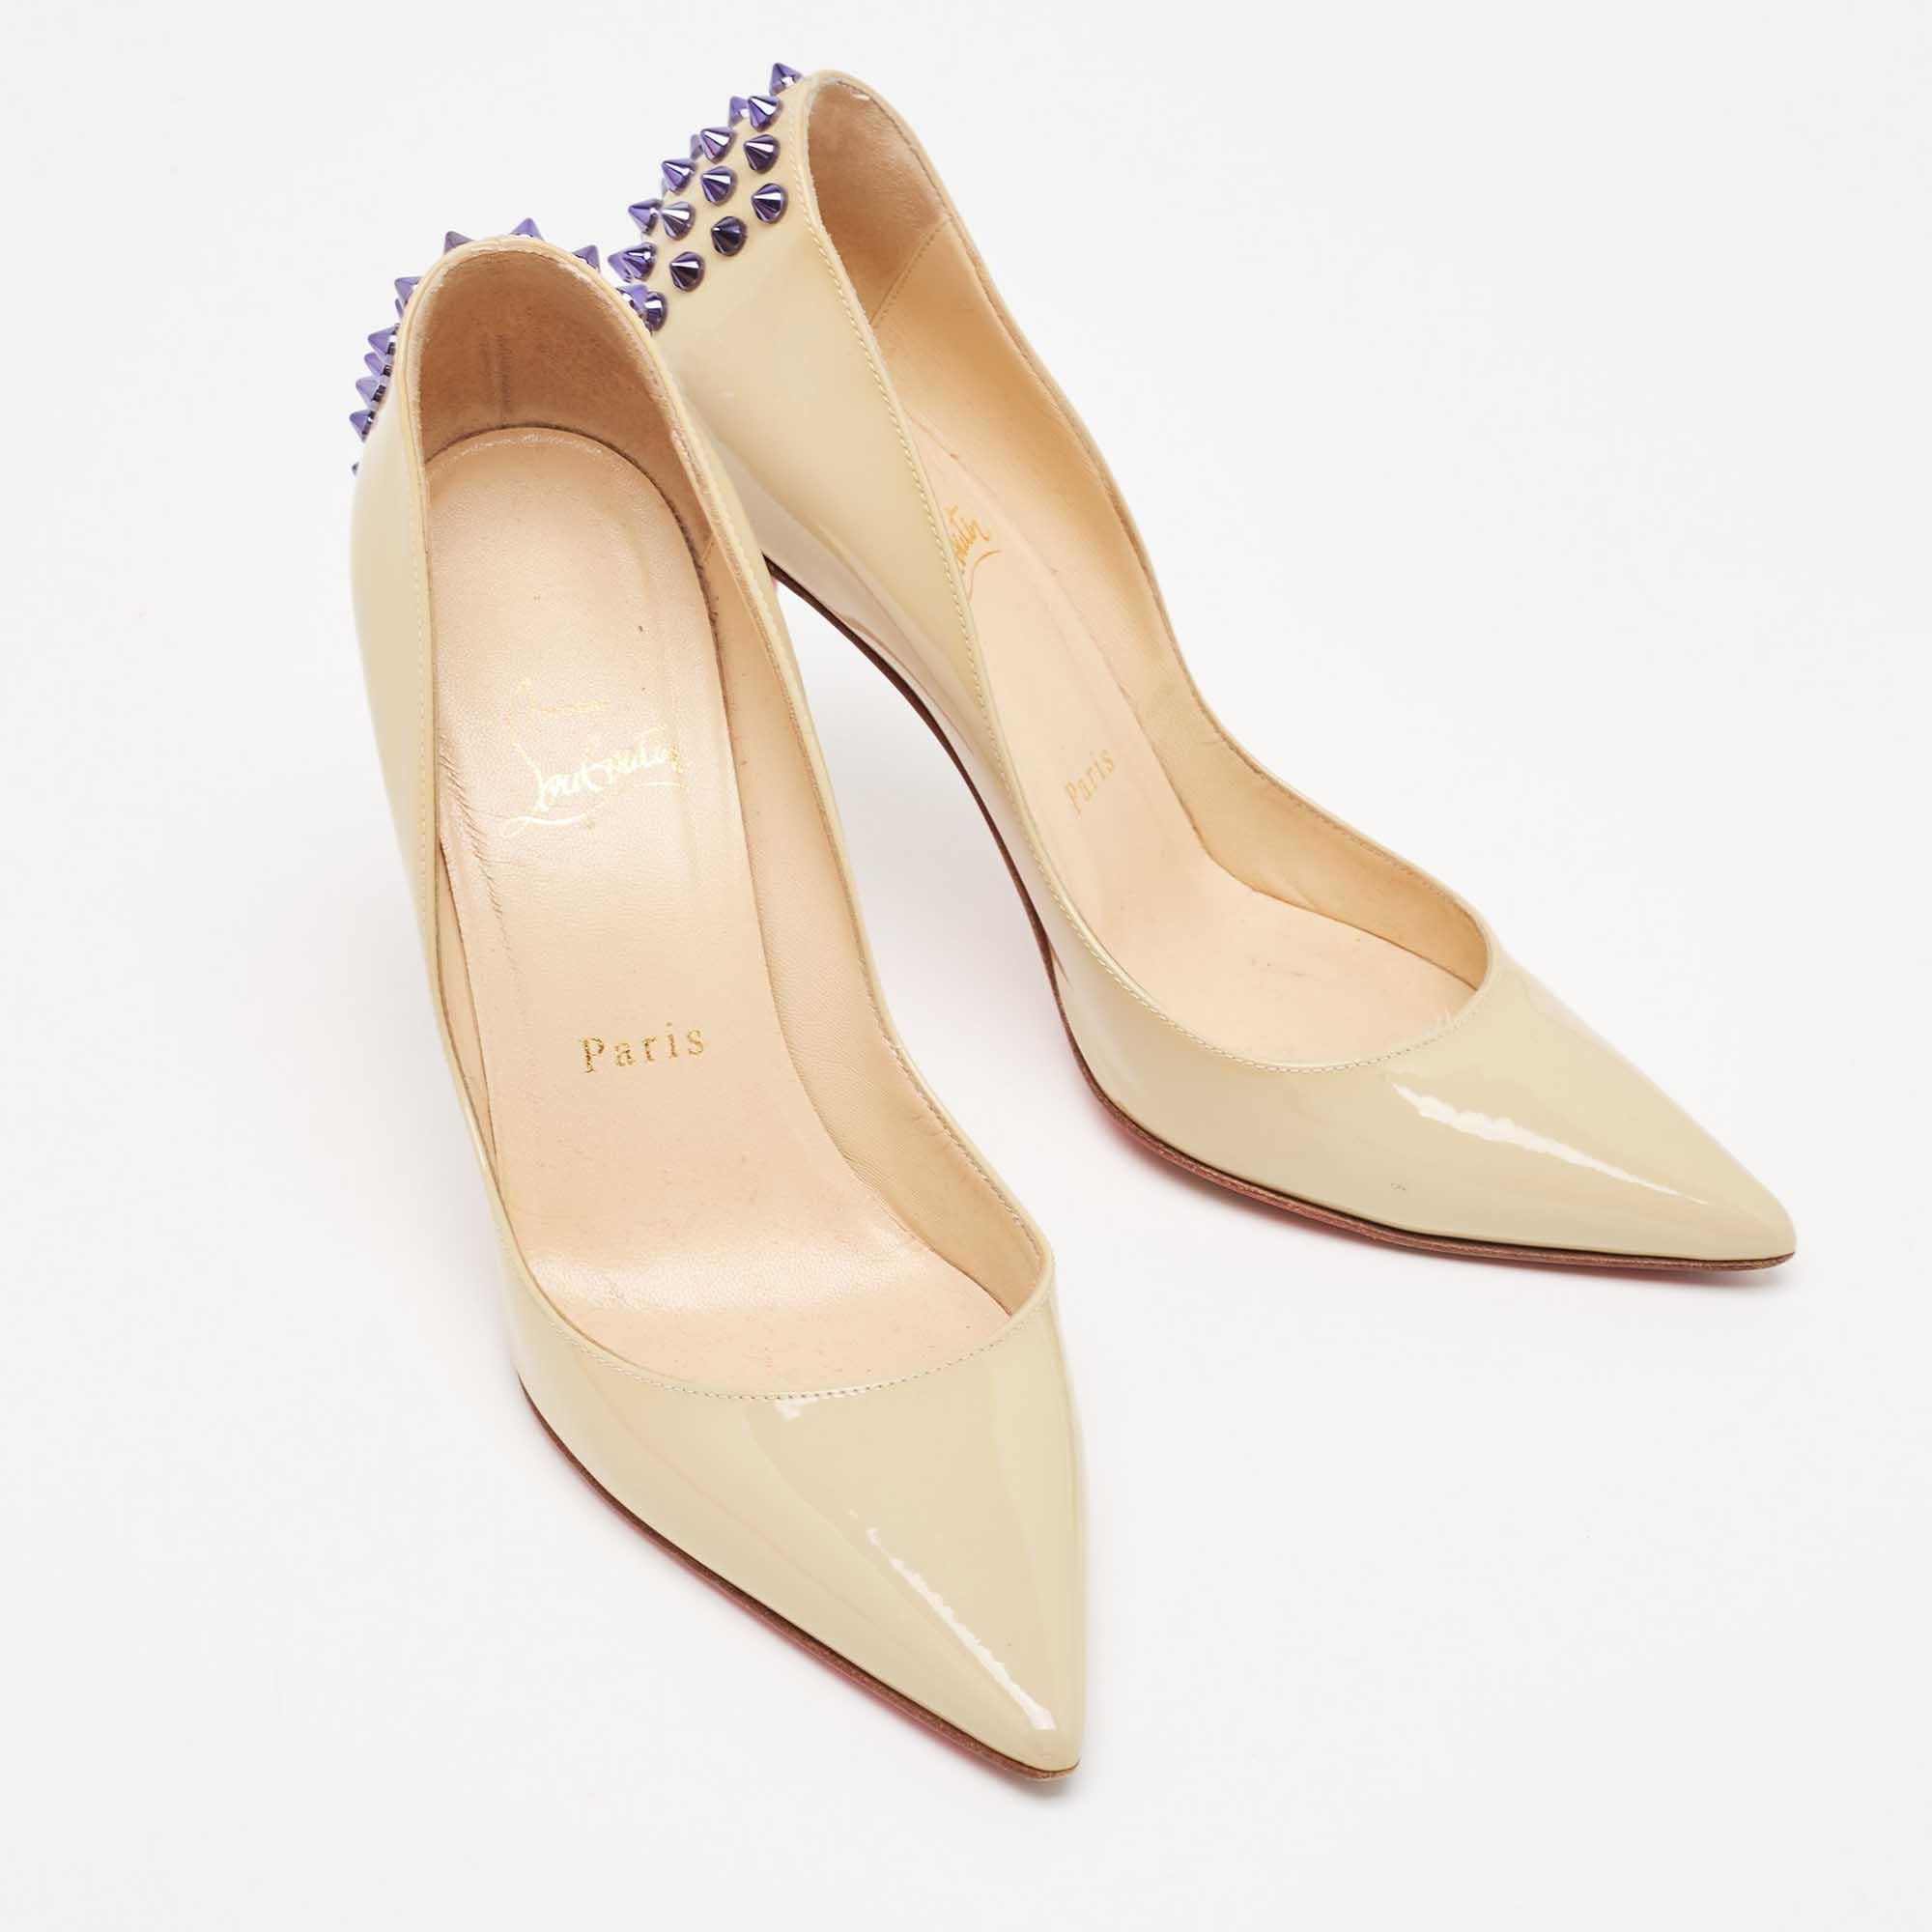 Women's Christian Louboutin Beige Patent Leather Spiked Pumps Size 37 For Sale